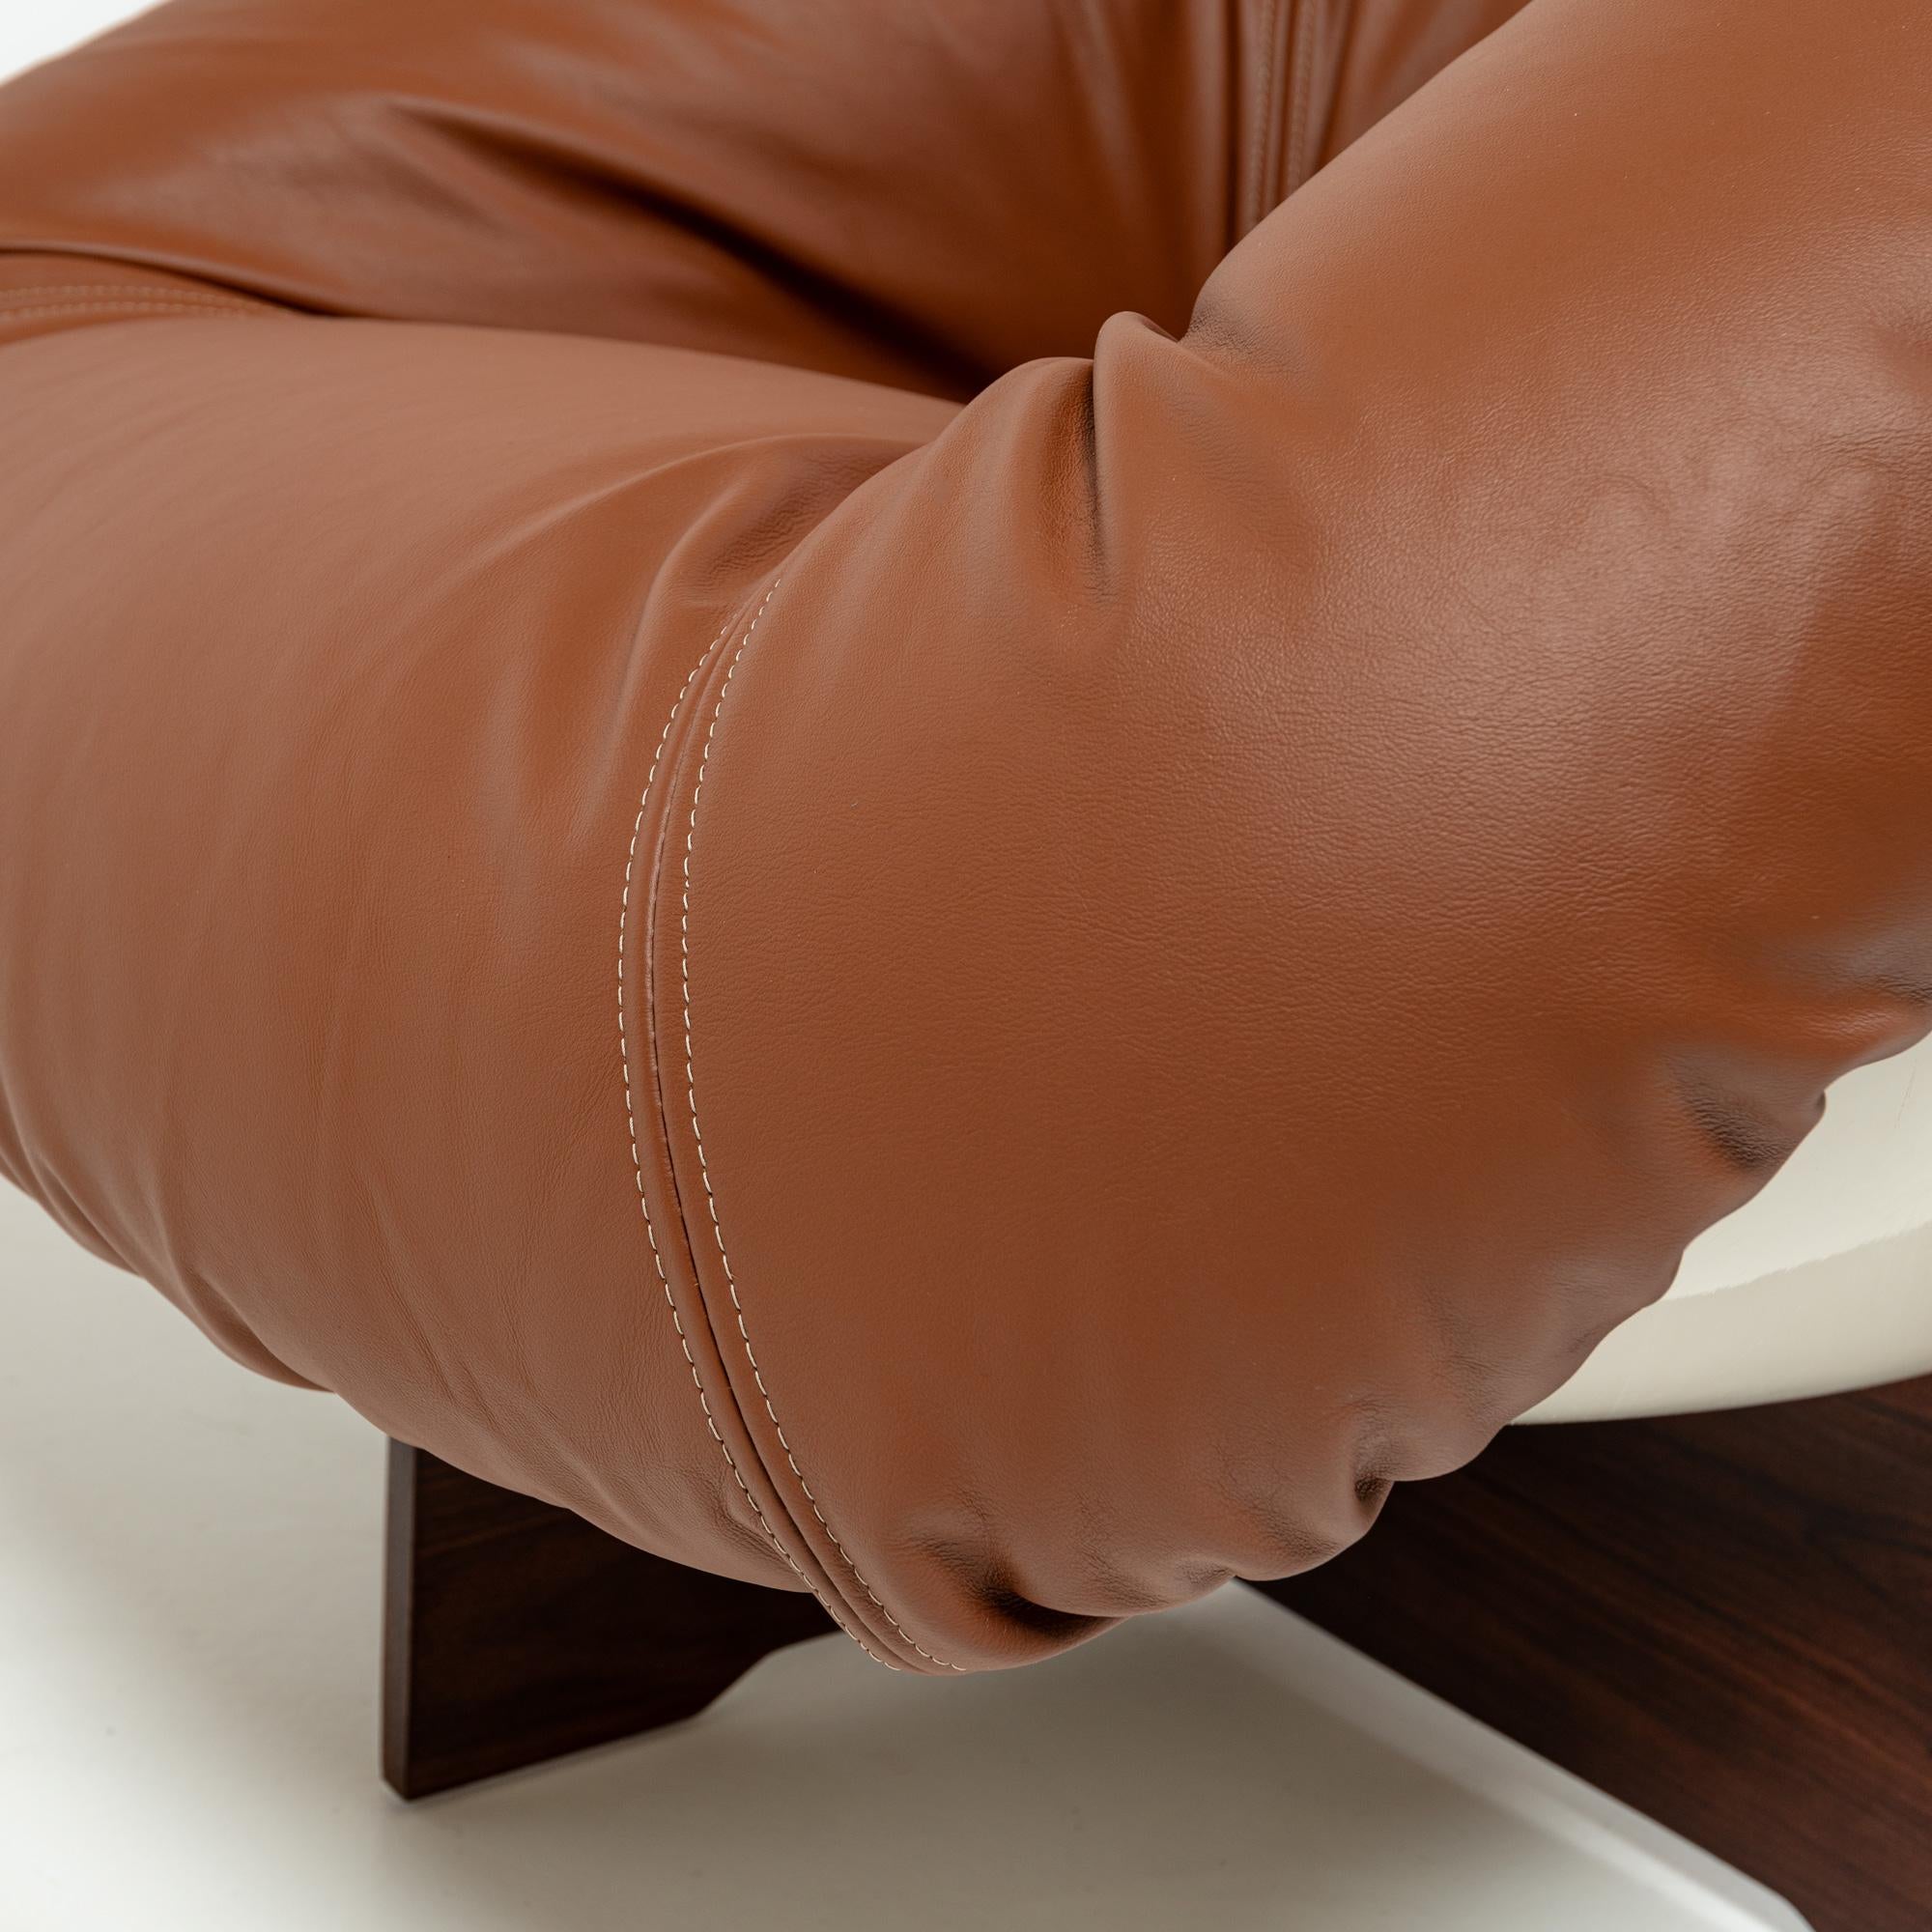 Percival Lafer's Lounge Chair model MP-61 in Maharam Leather and Rosewood, 1973 For Sale 4